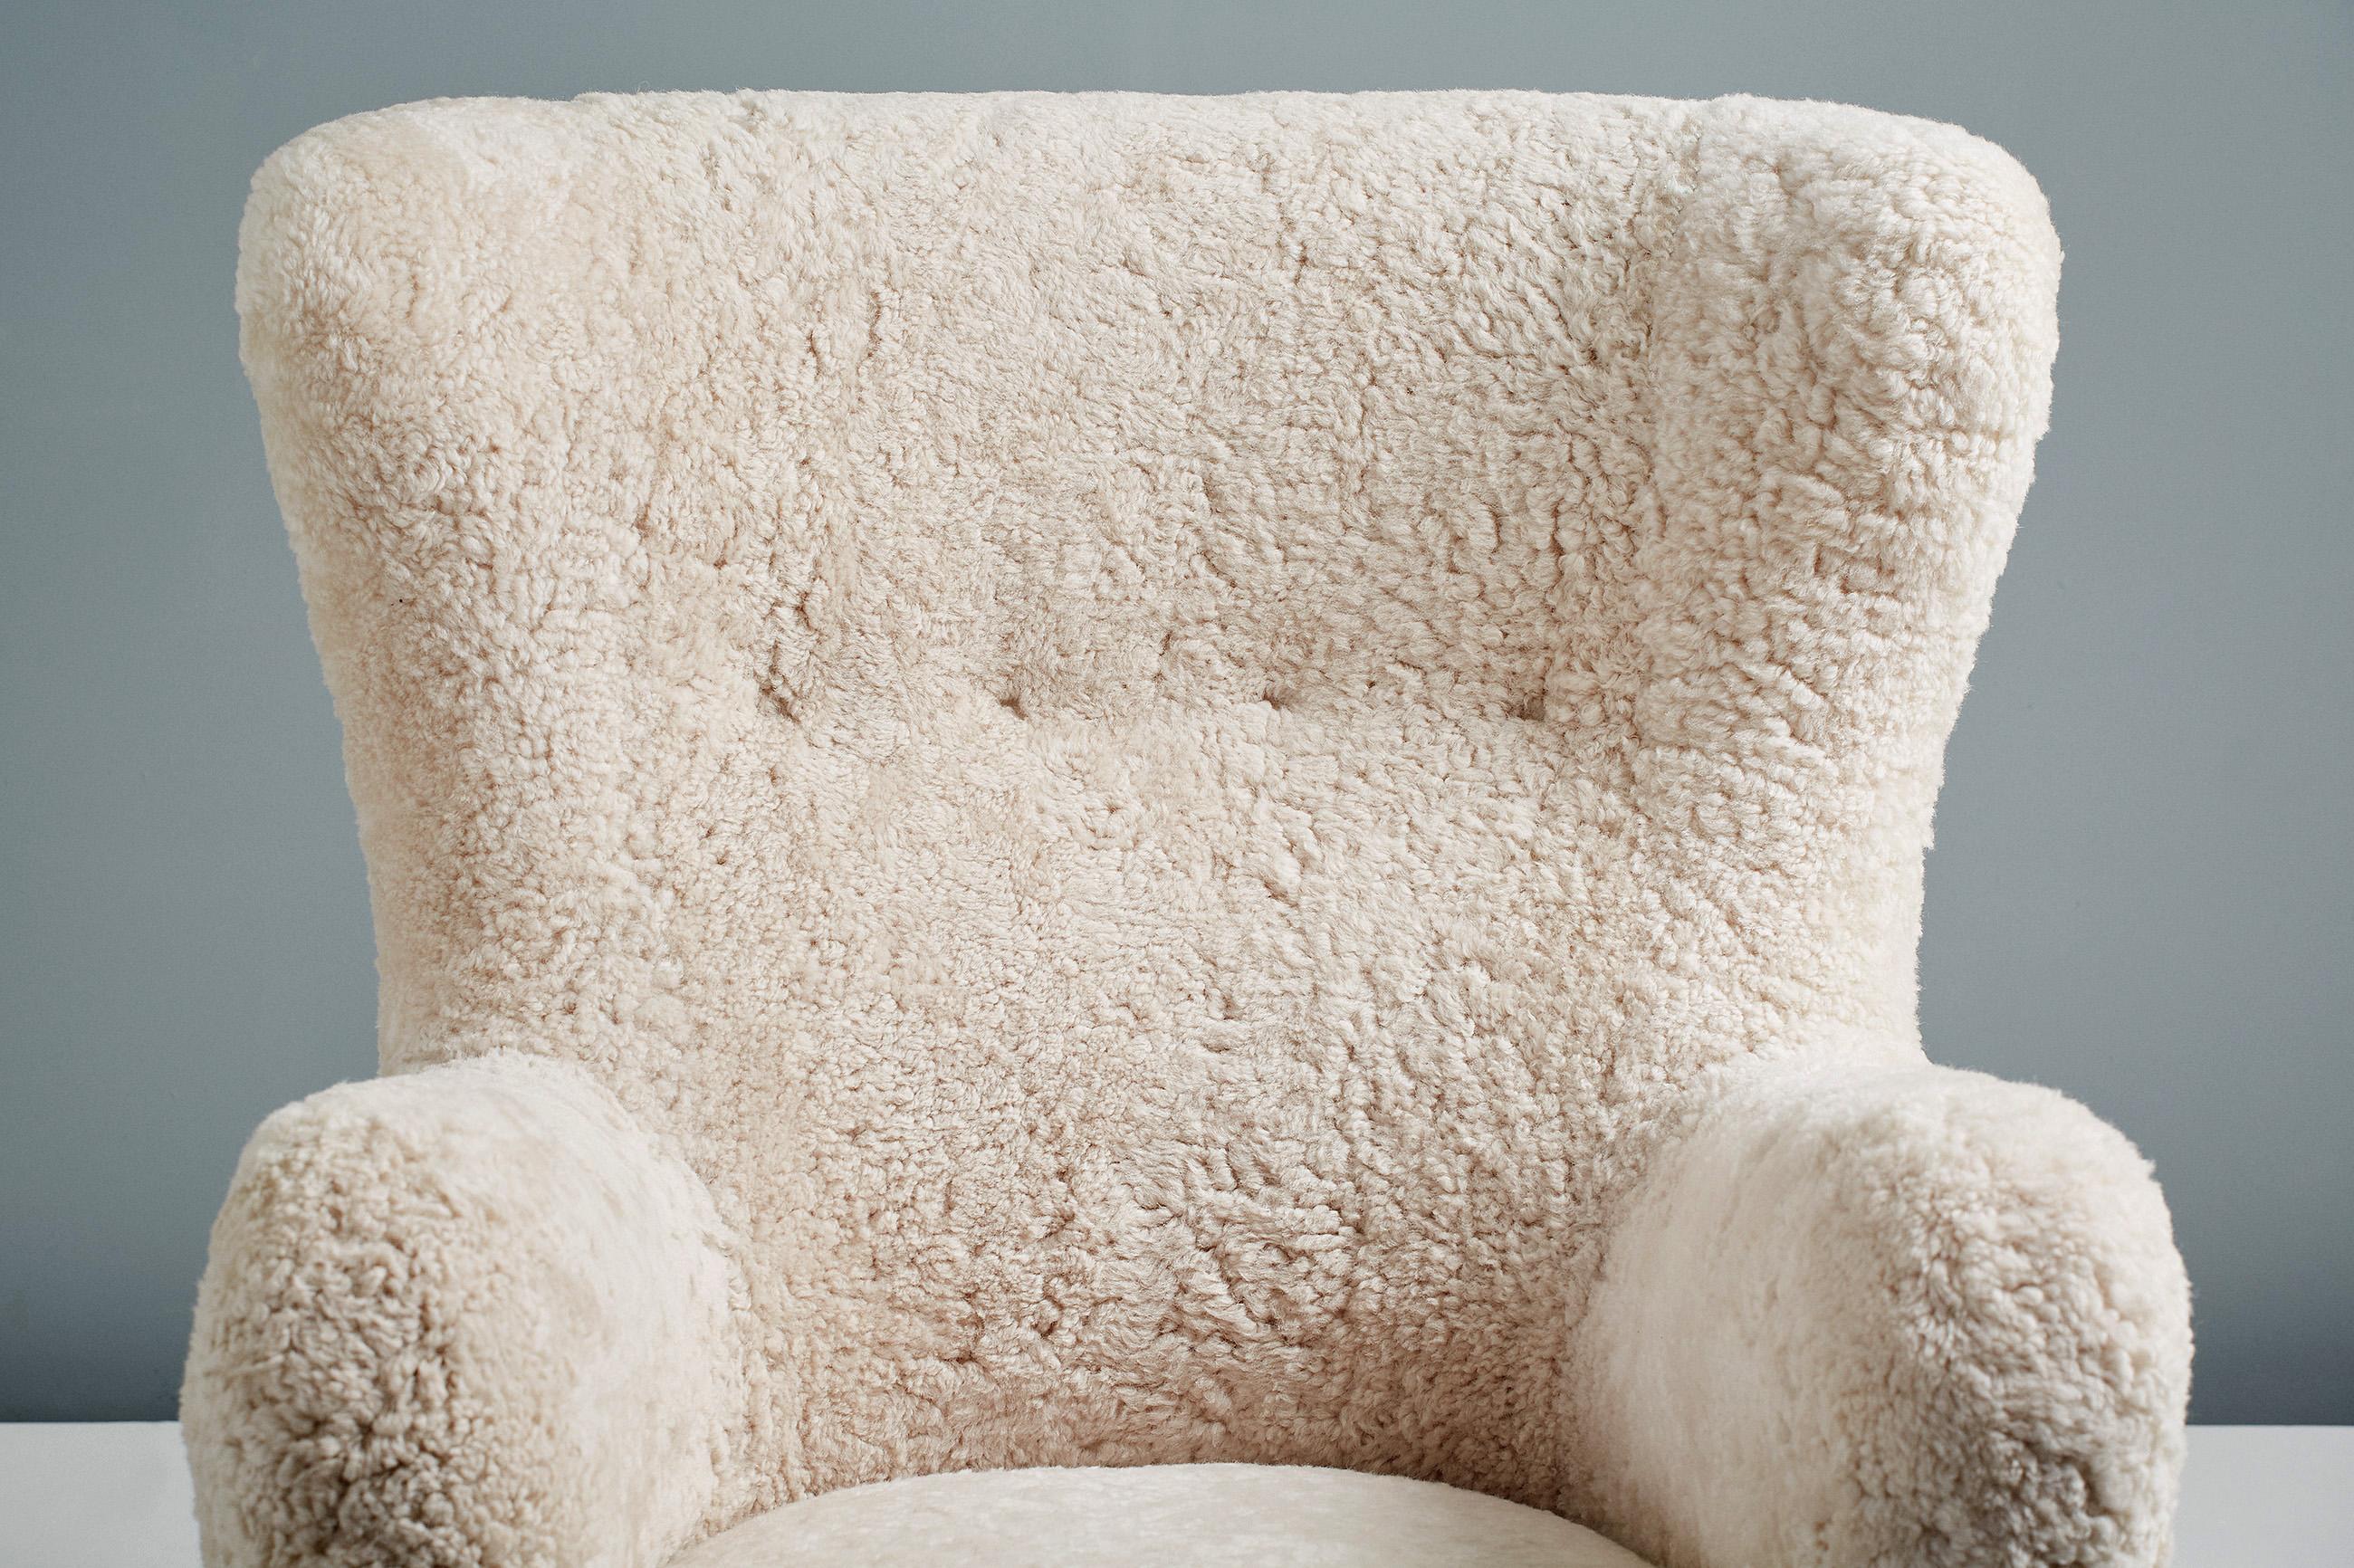 Custom Made Sheepskin Wing Chair In New Condition For Sale In London, GB